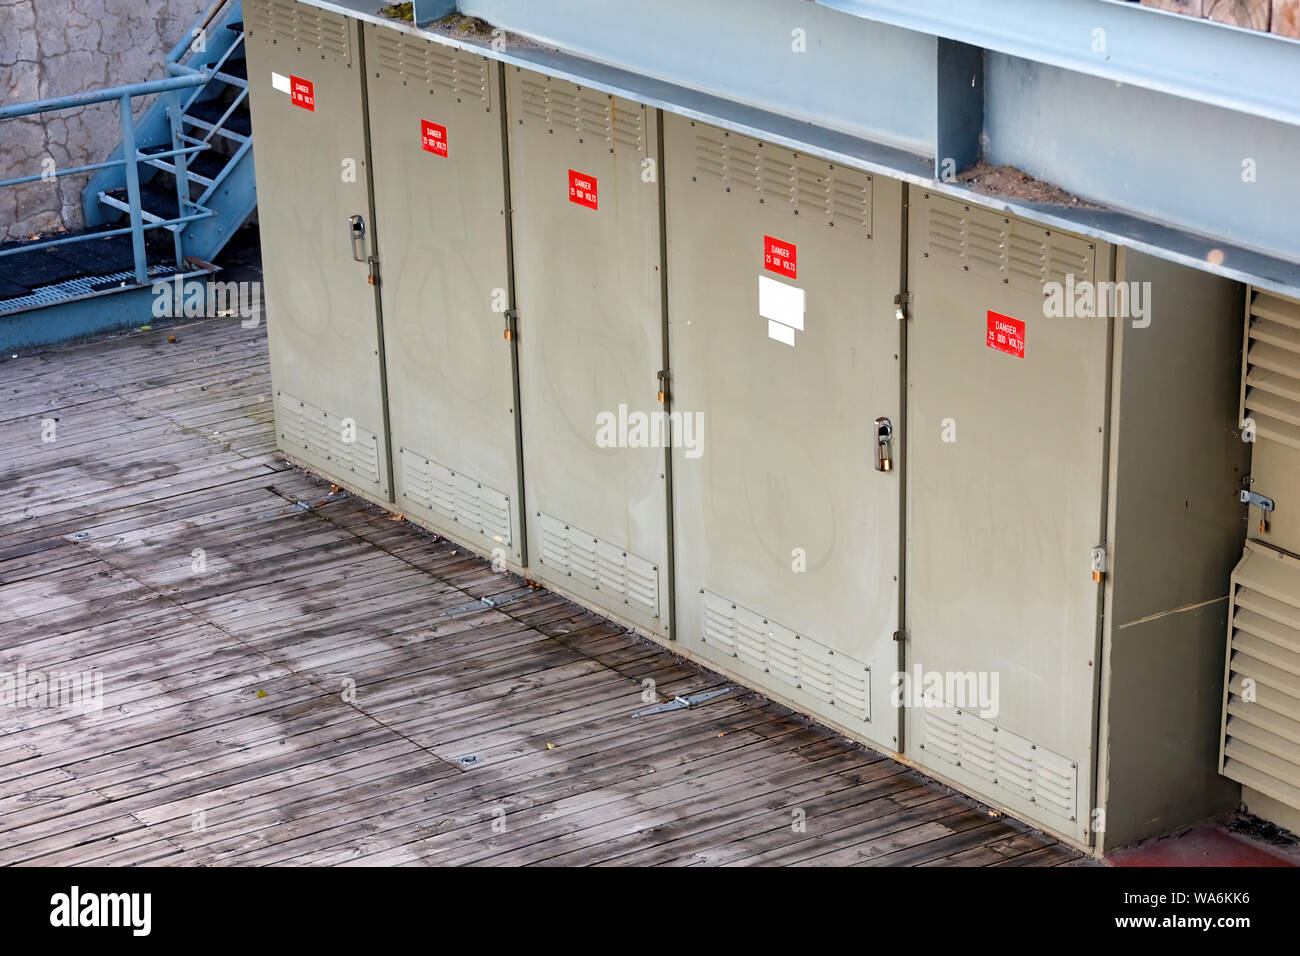 Electricity power transformer substation boxes aligned in an outdoor facility Stock Photo